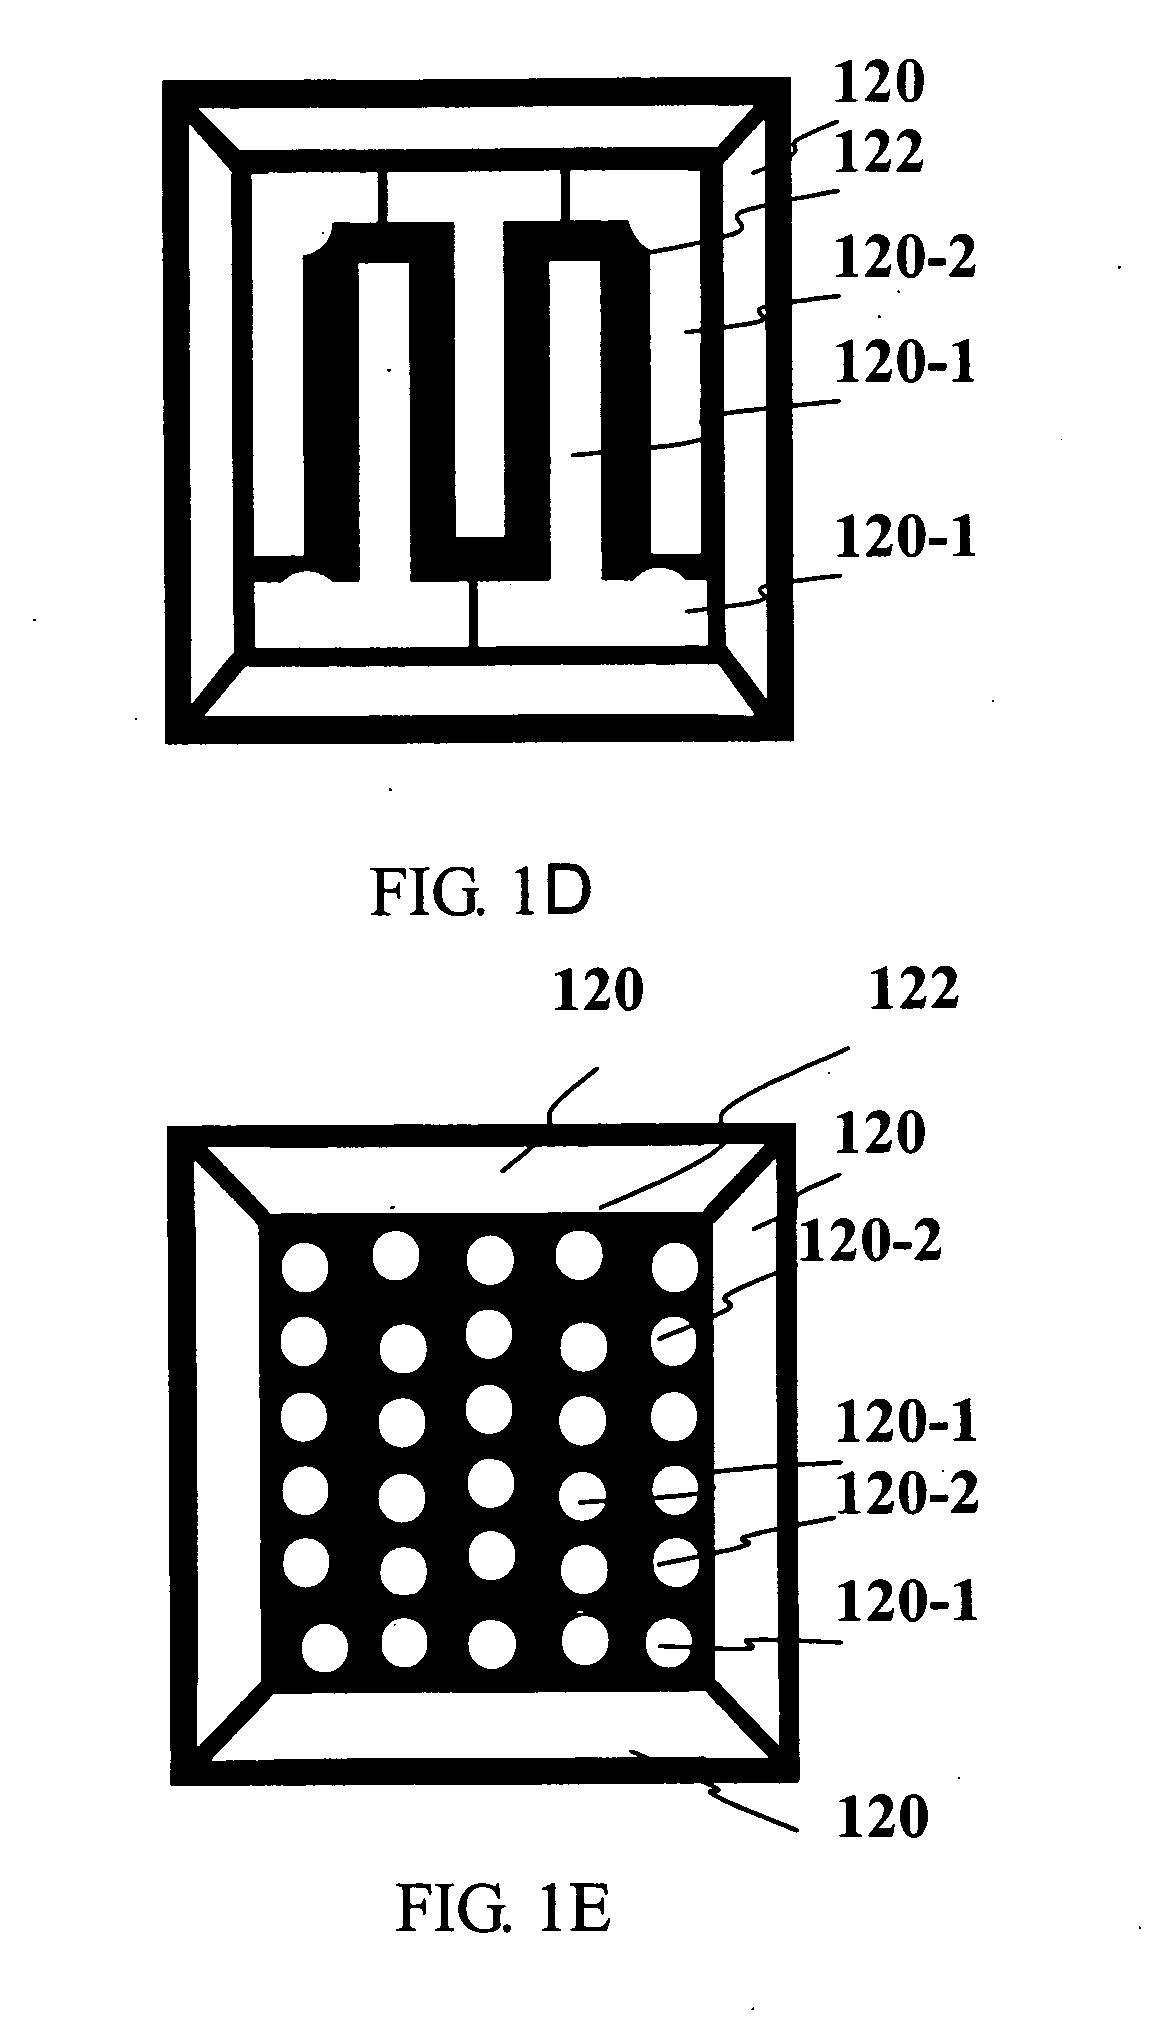 Wire-bonding free packaging structure of light emitted diode